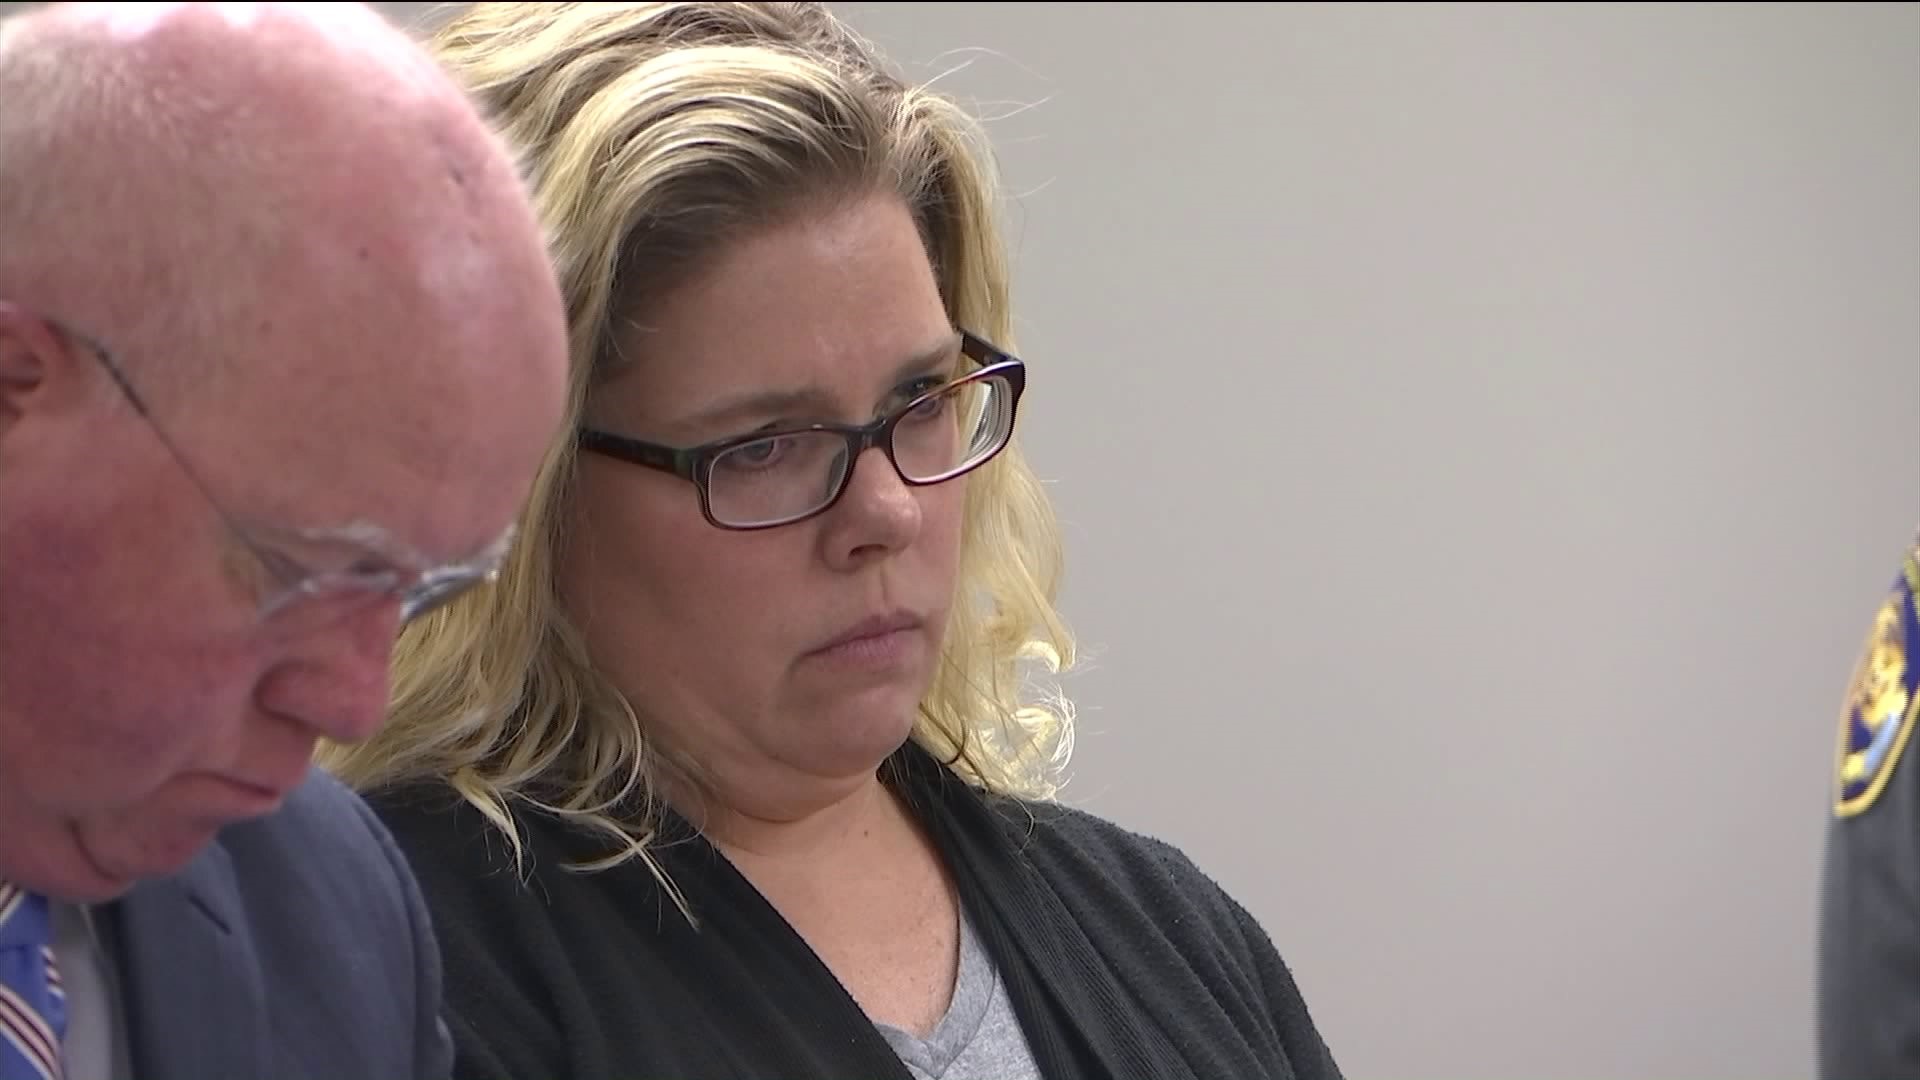 Glastonbury daycare director sentenced to 150 days in jail for not reporting child abuse